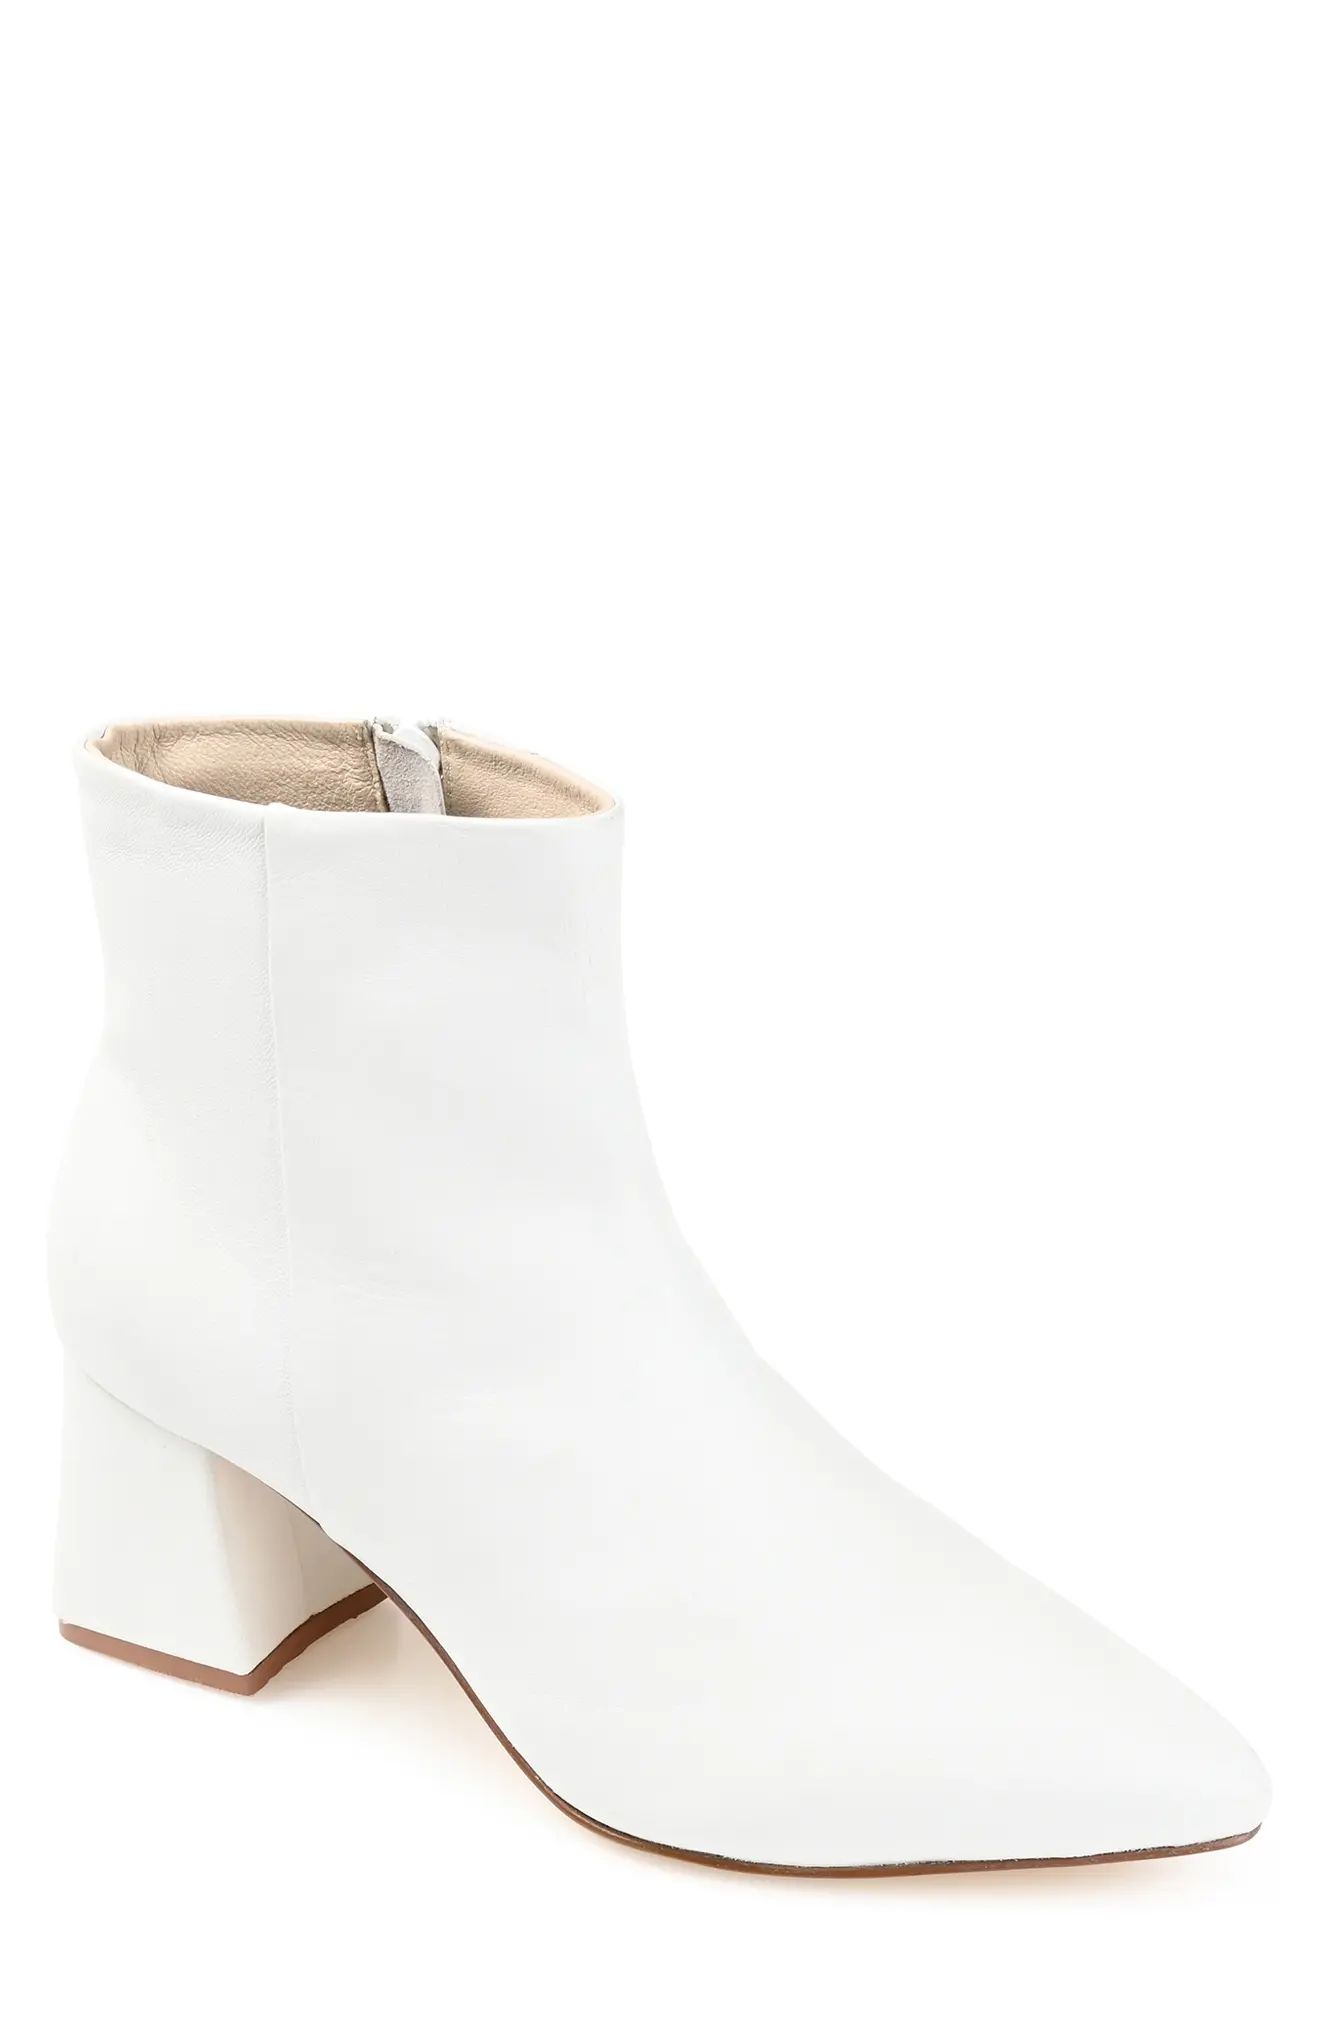 Journee Signature Tabbie Pointed Toe Bootie in White at Nordstrom, Size 6.5 | Nordstrom